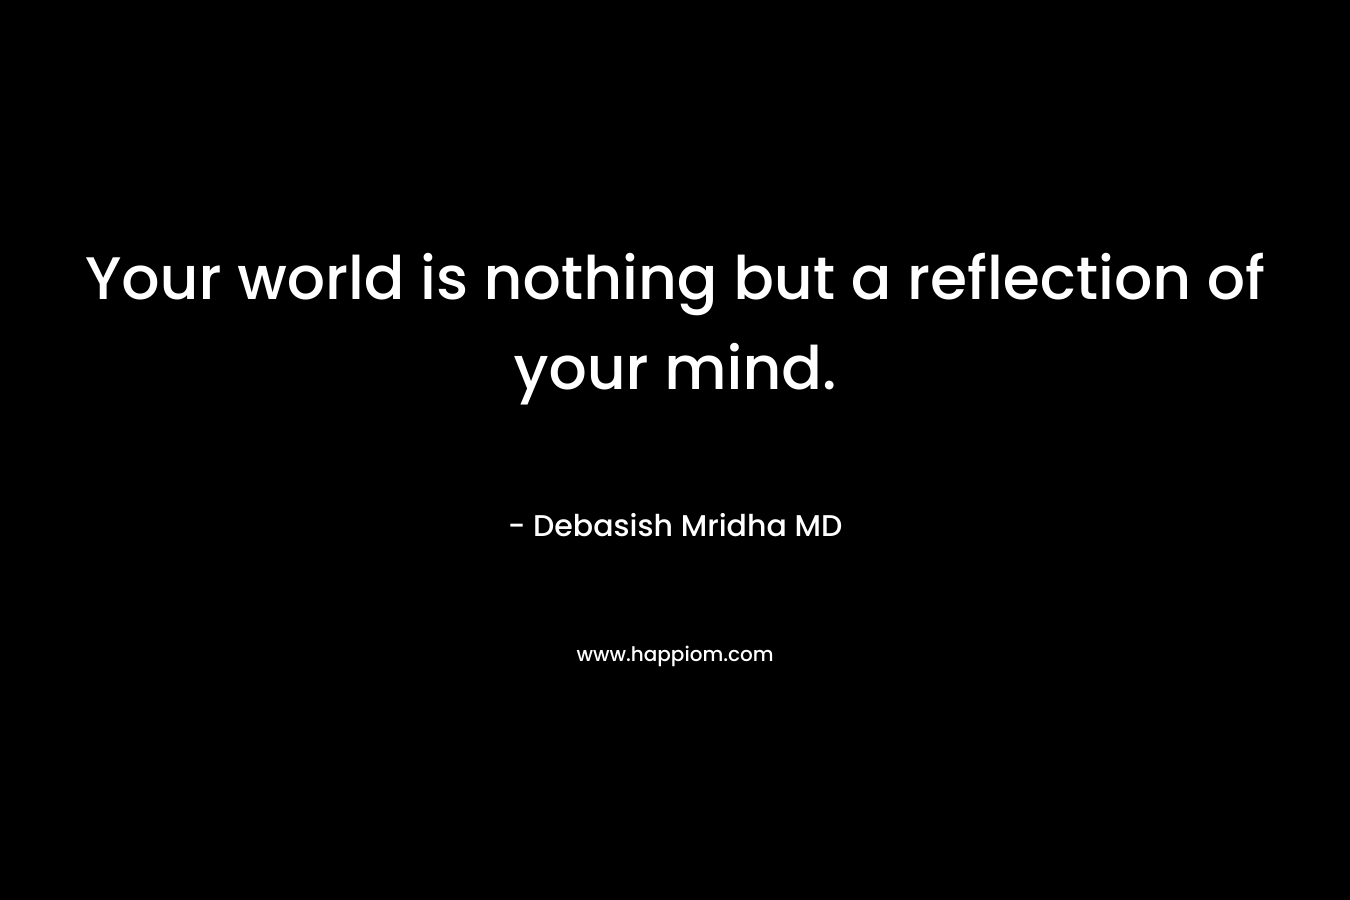 Your world is nothing but a reflection of your mind.